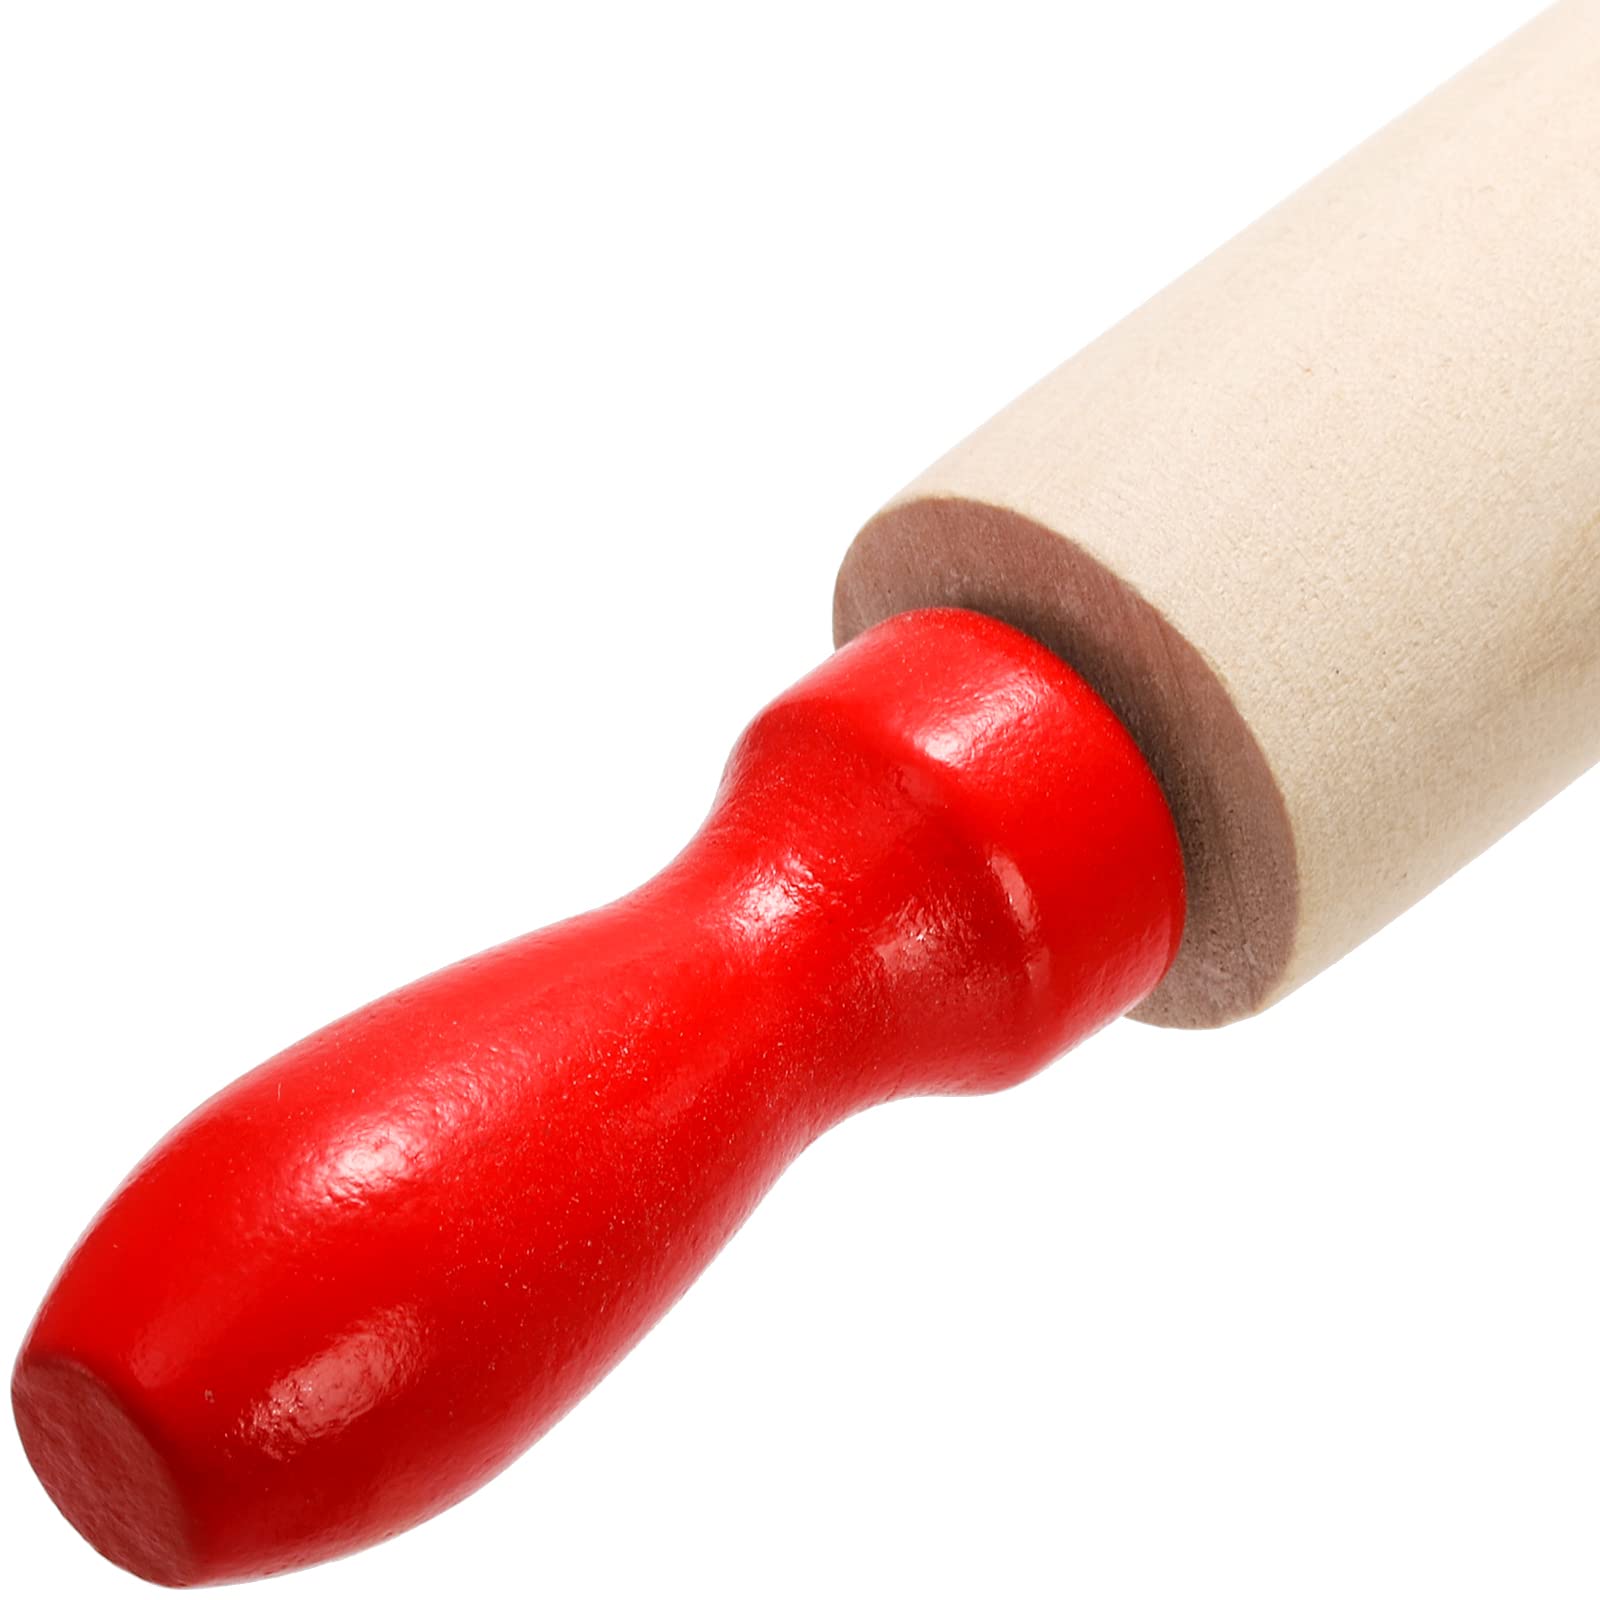 SOUJOY Set of 12 Mini Rolling Pin, 8 Inch Wood Dough Roller with Red Handle, Small Dough Rolling Pin for Craft Fondant Pastry Pizza Crafting and Imaginative Play